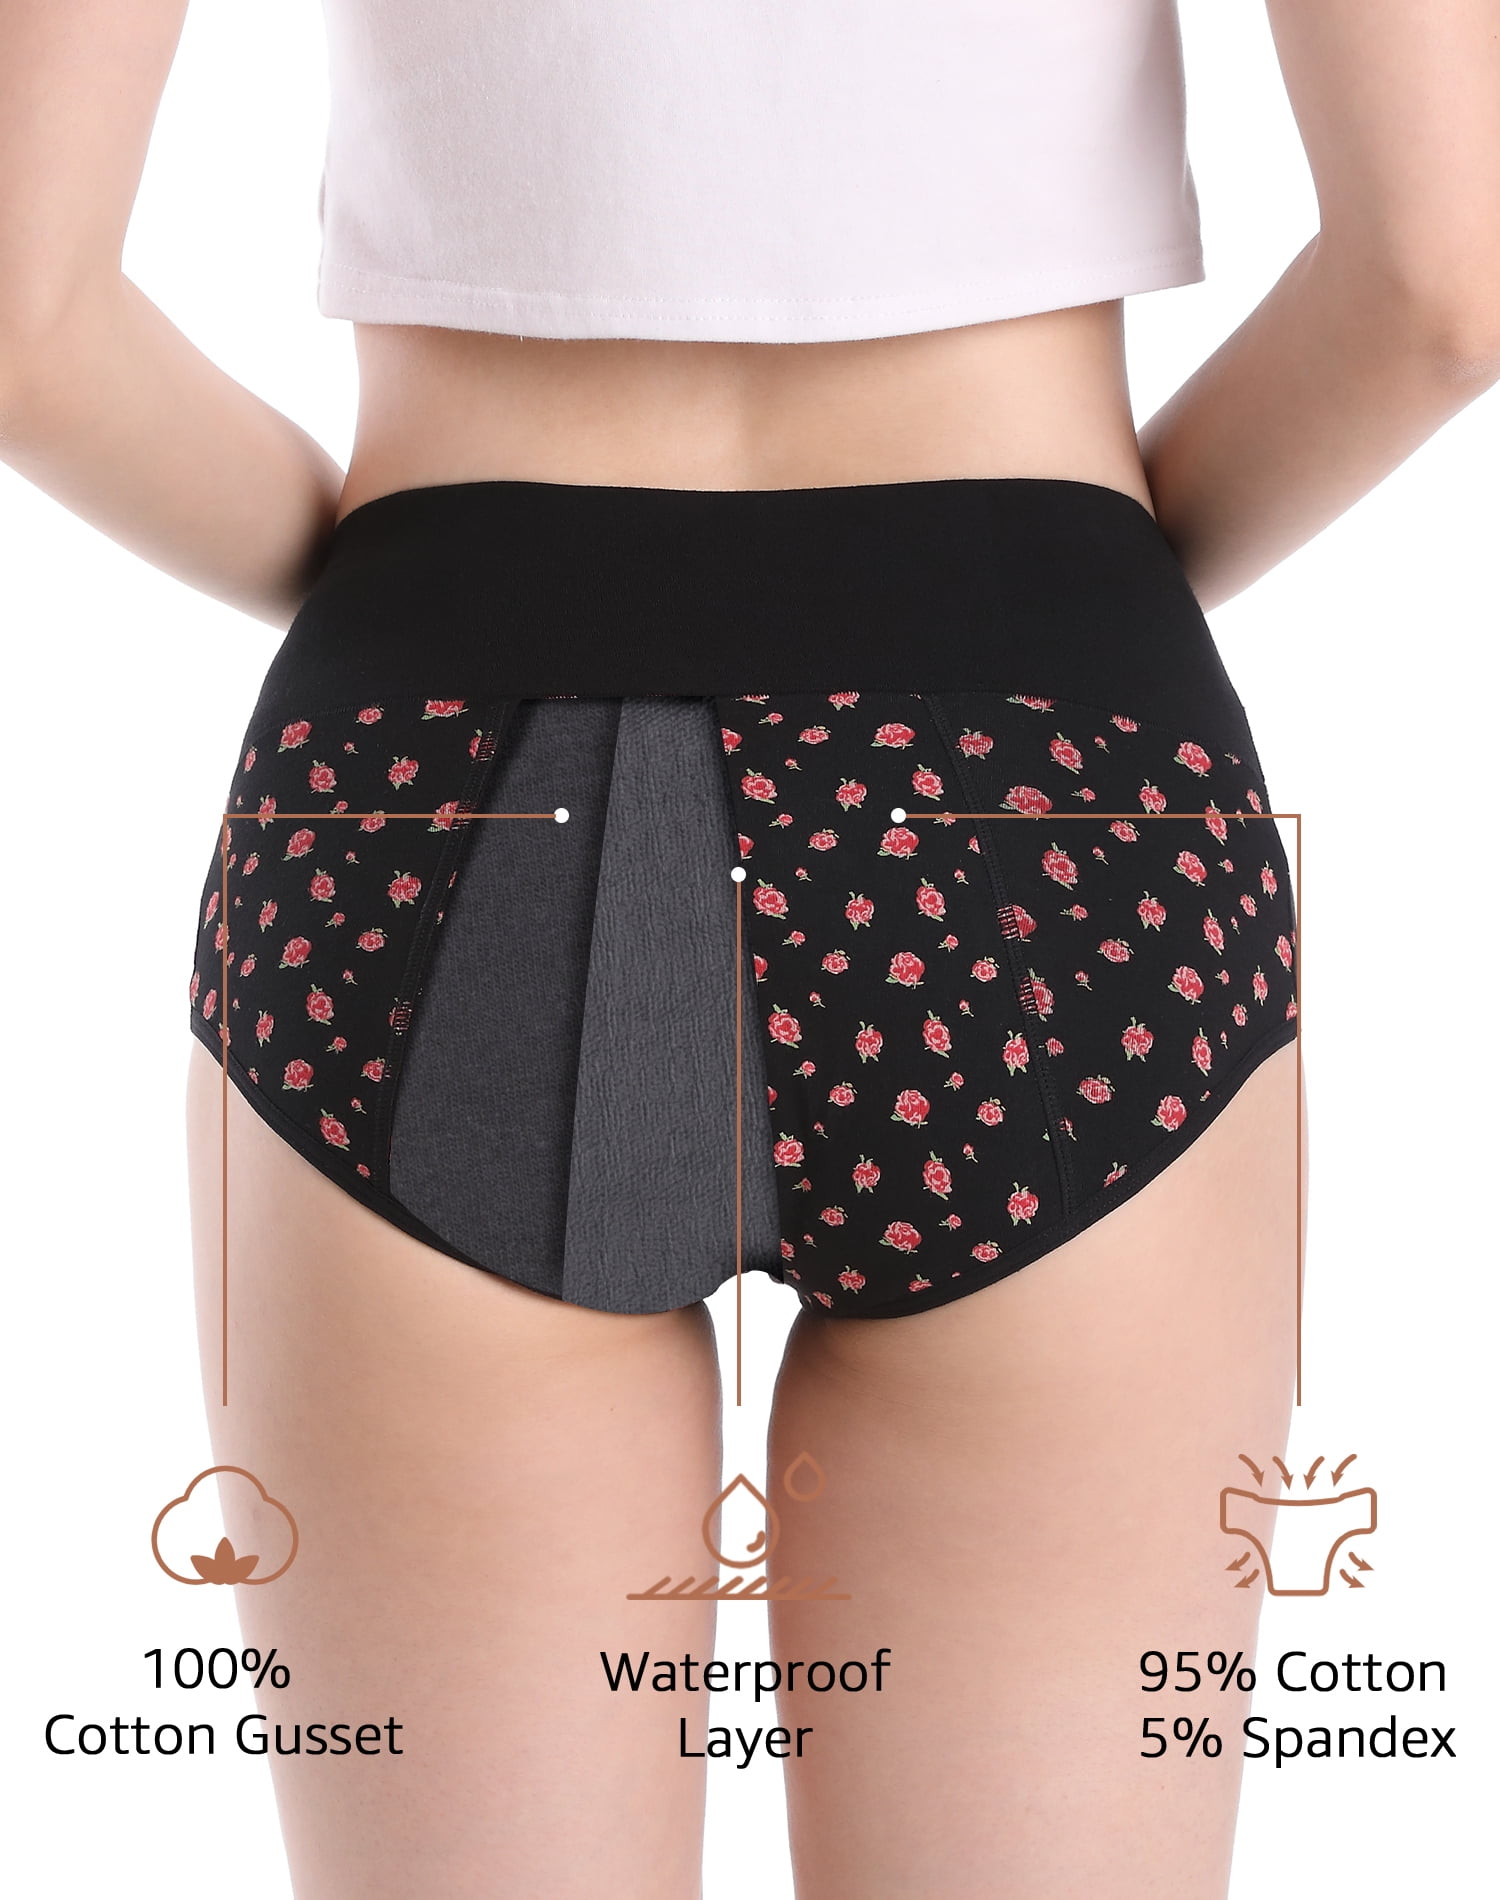 INNERSY Period Panties for Women High Waist Postpartum Underwear Leakproof  Menstrual Briefs Pack of 3(S,Black With Gray Waistband) 